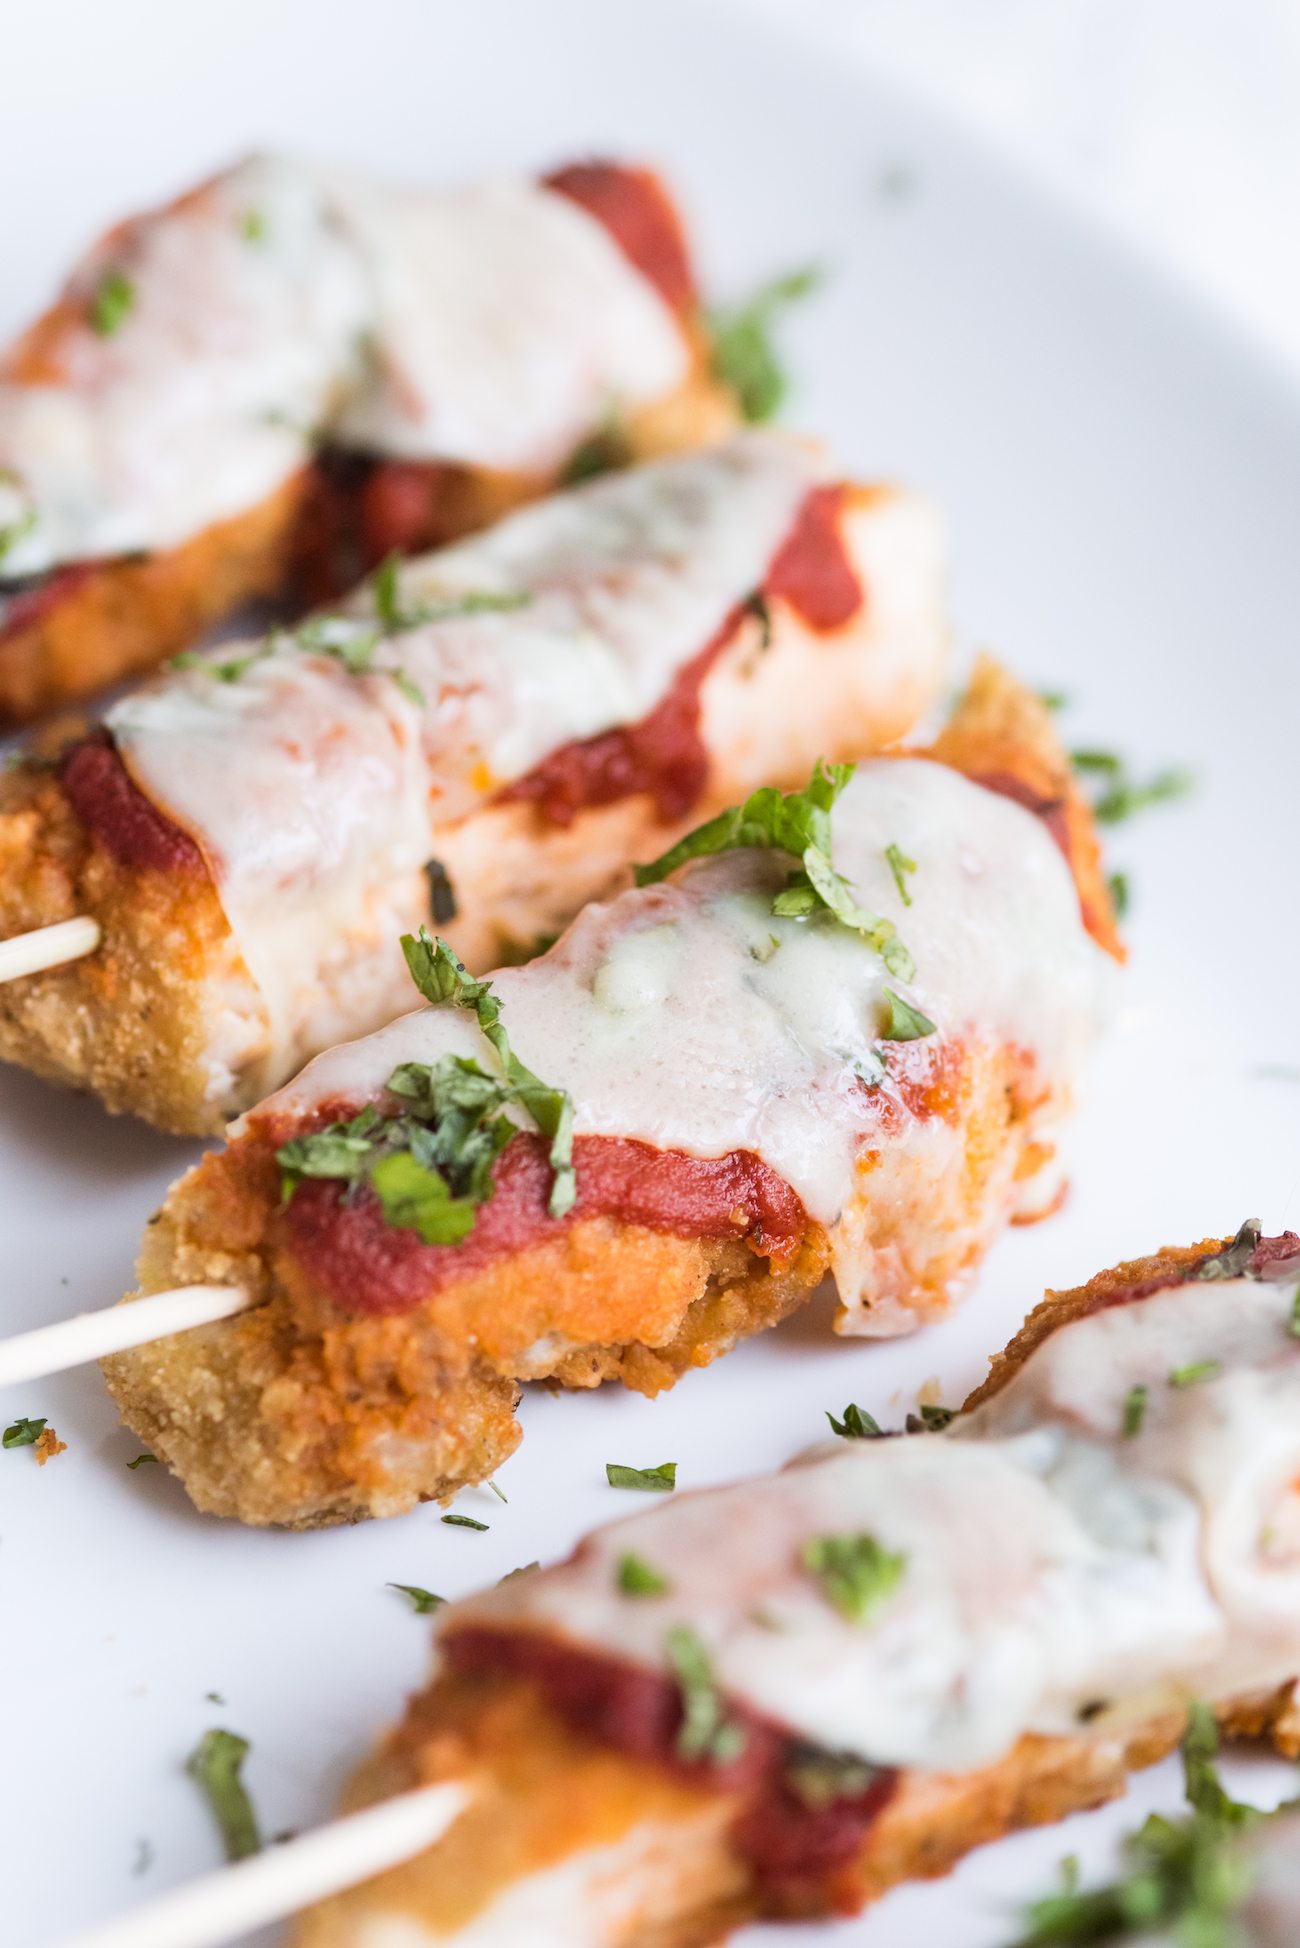 Last Minute Entertaining | Mini chicken parm on a stick from @cydconverse